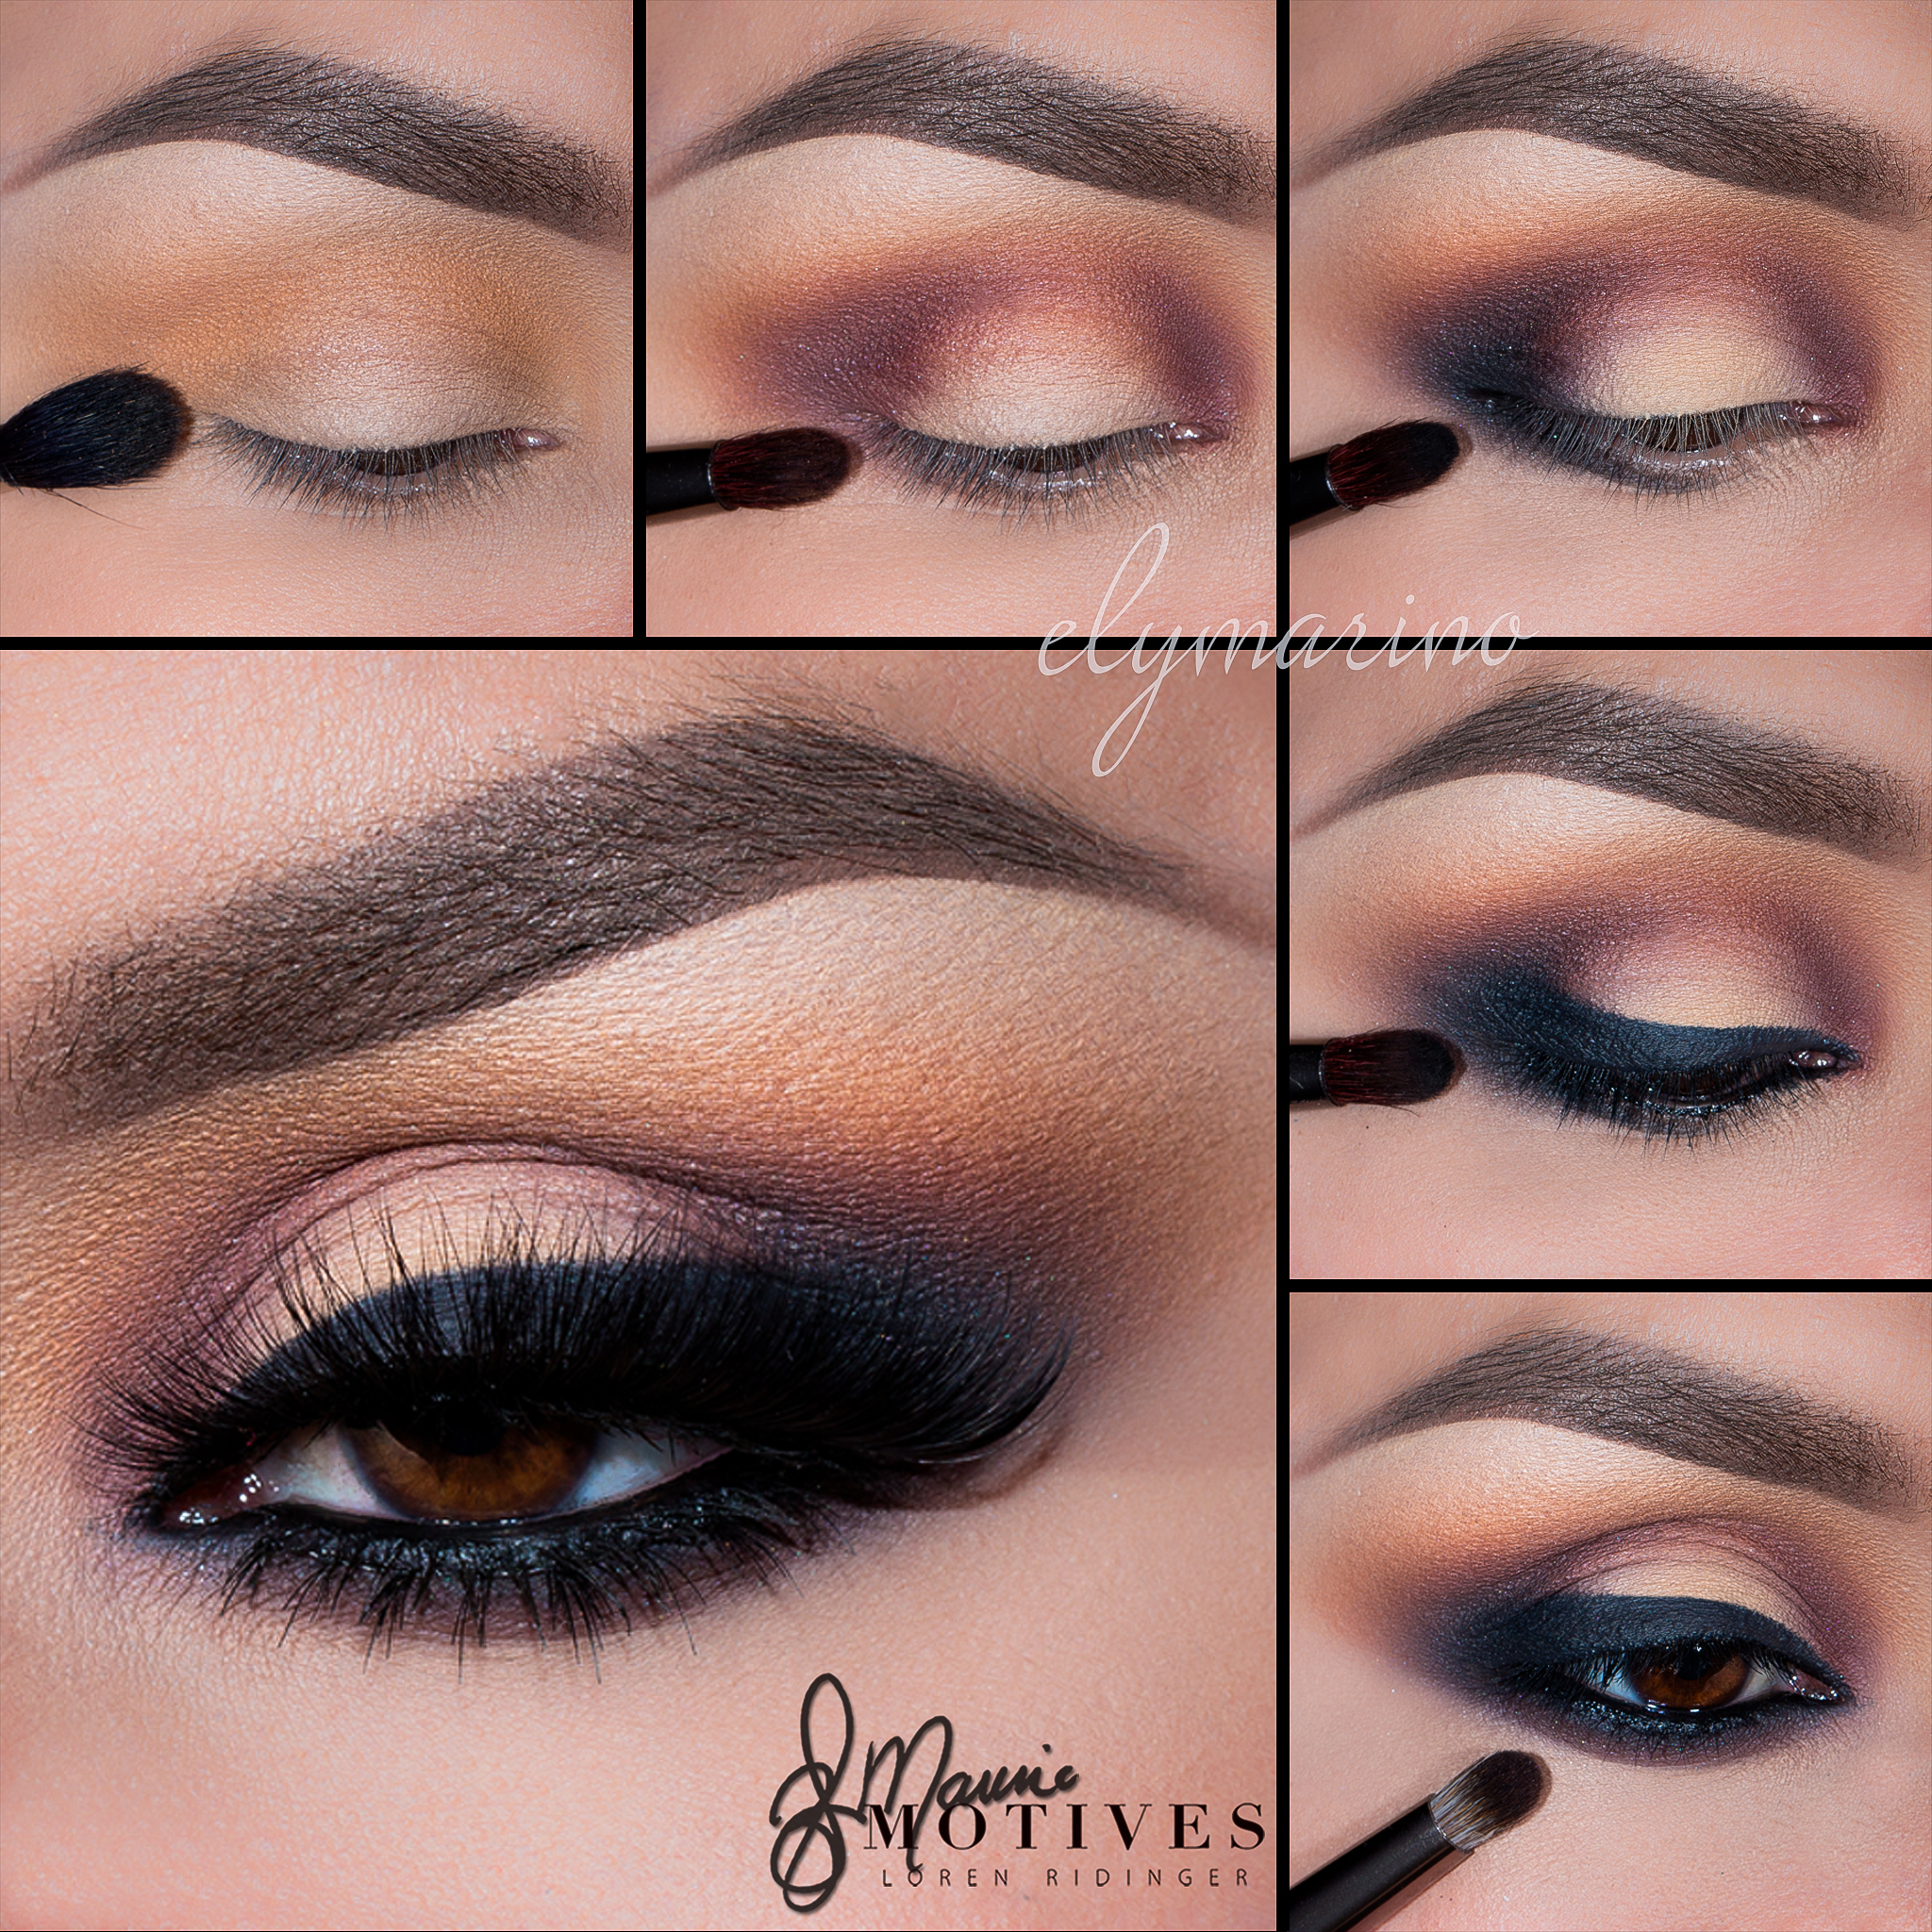 Sultry & Soft Smokey Eyelook ft Lunar Beauty Prism, Gallery posted by Gel  Beauty87